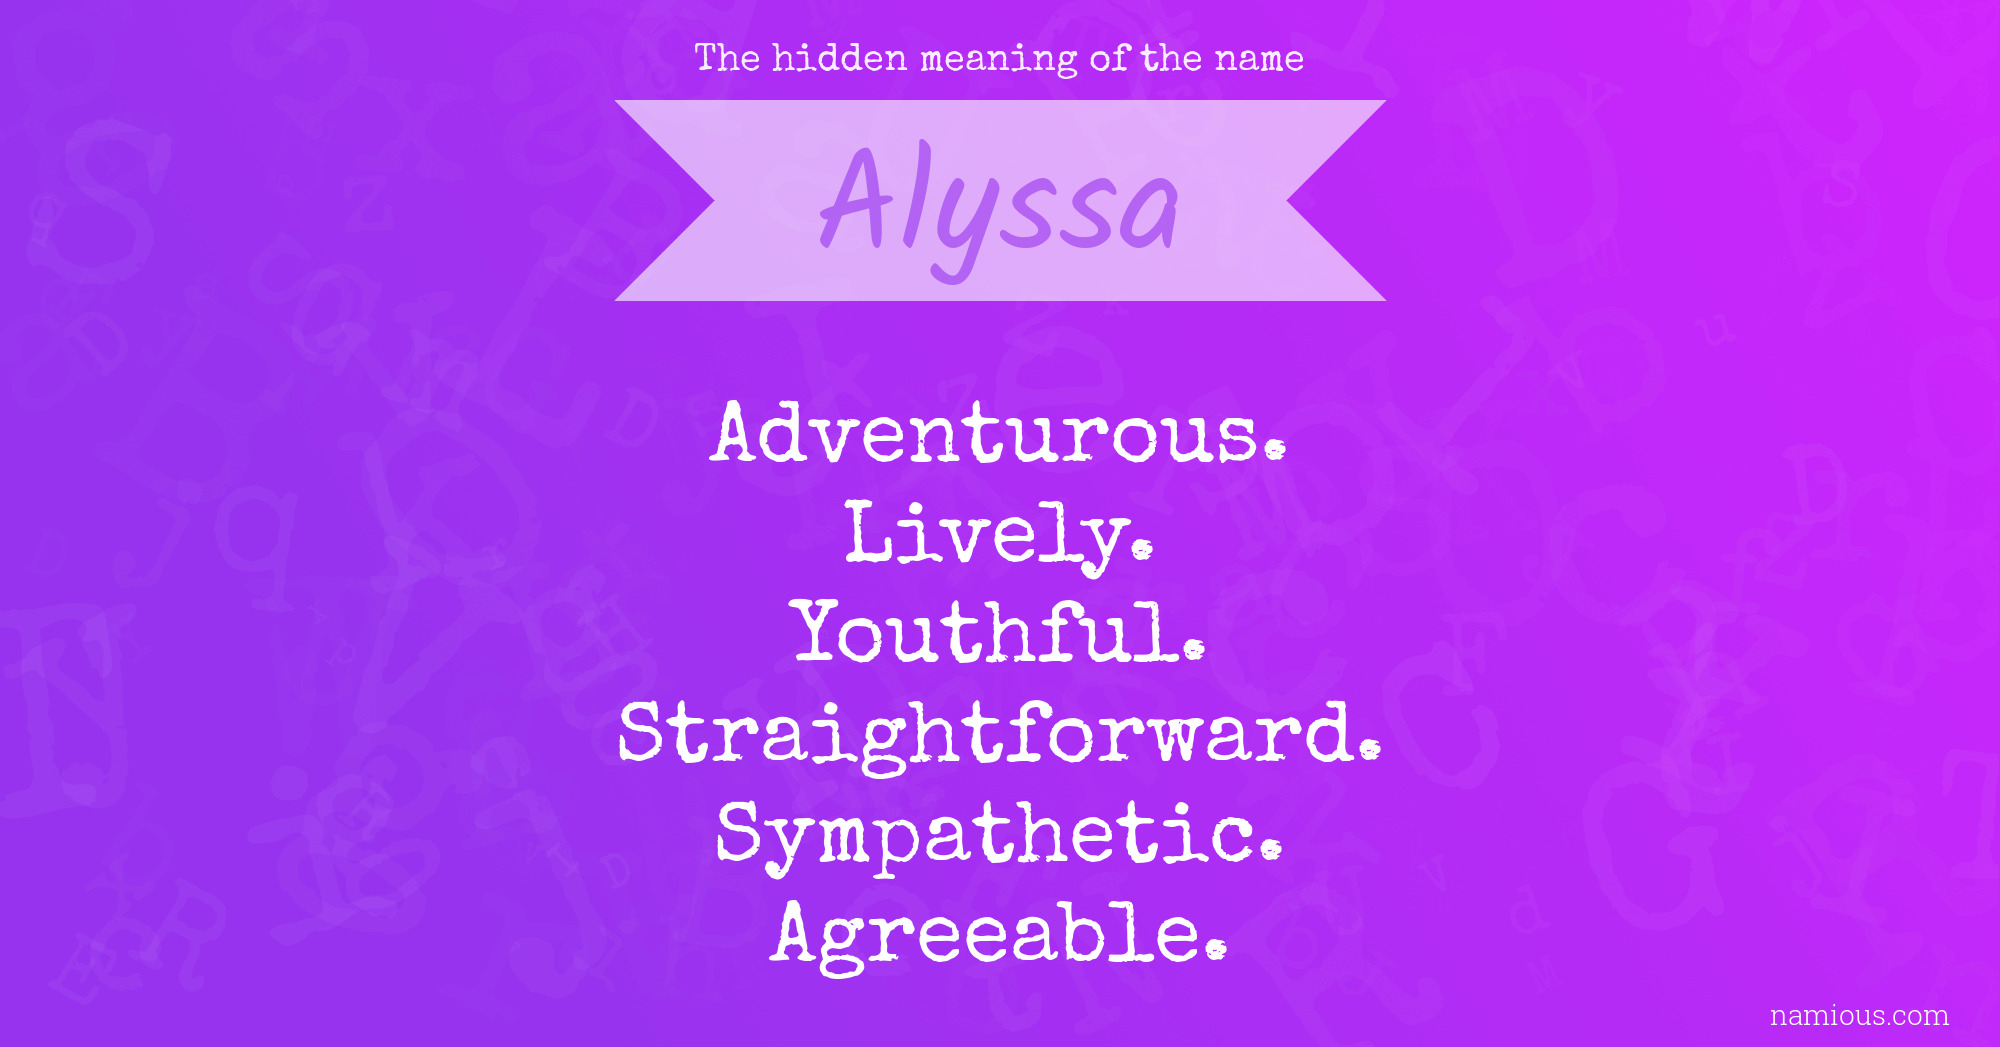 The hidden meaning of the name Alyssa